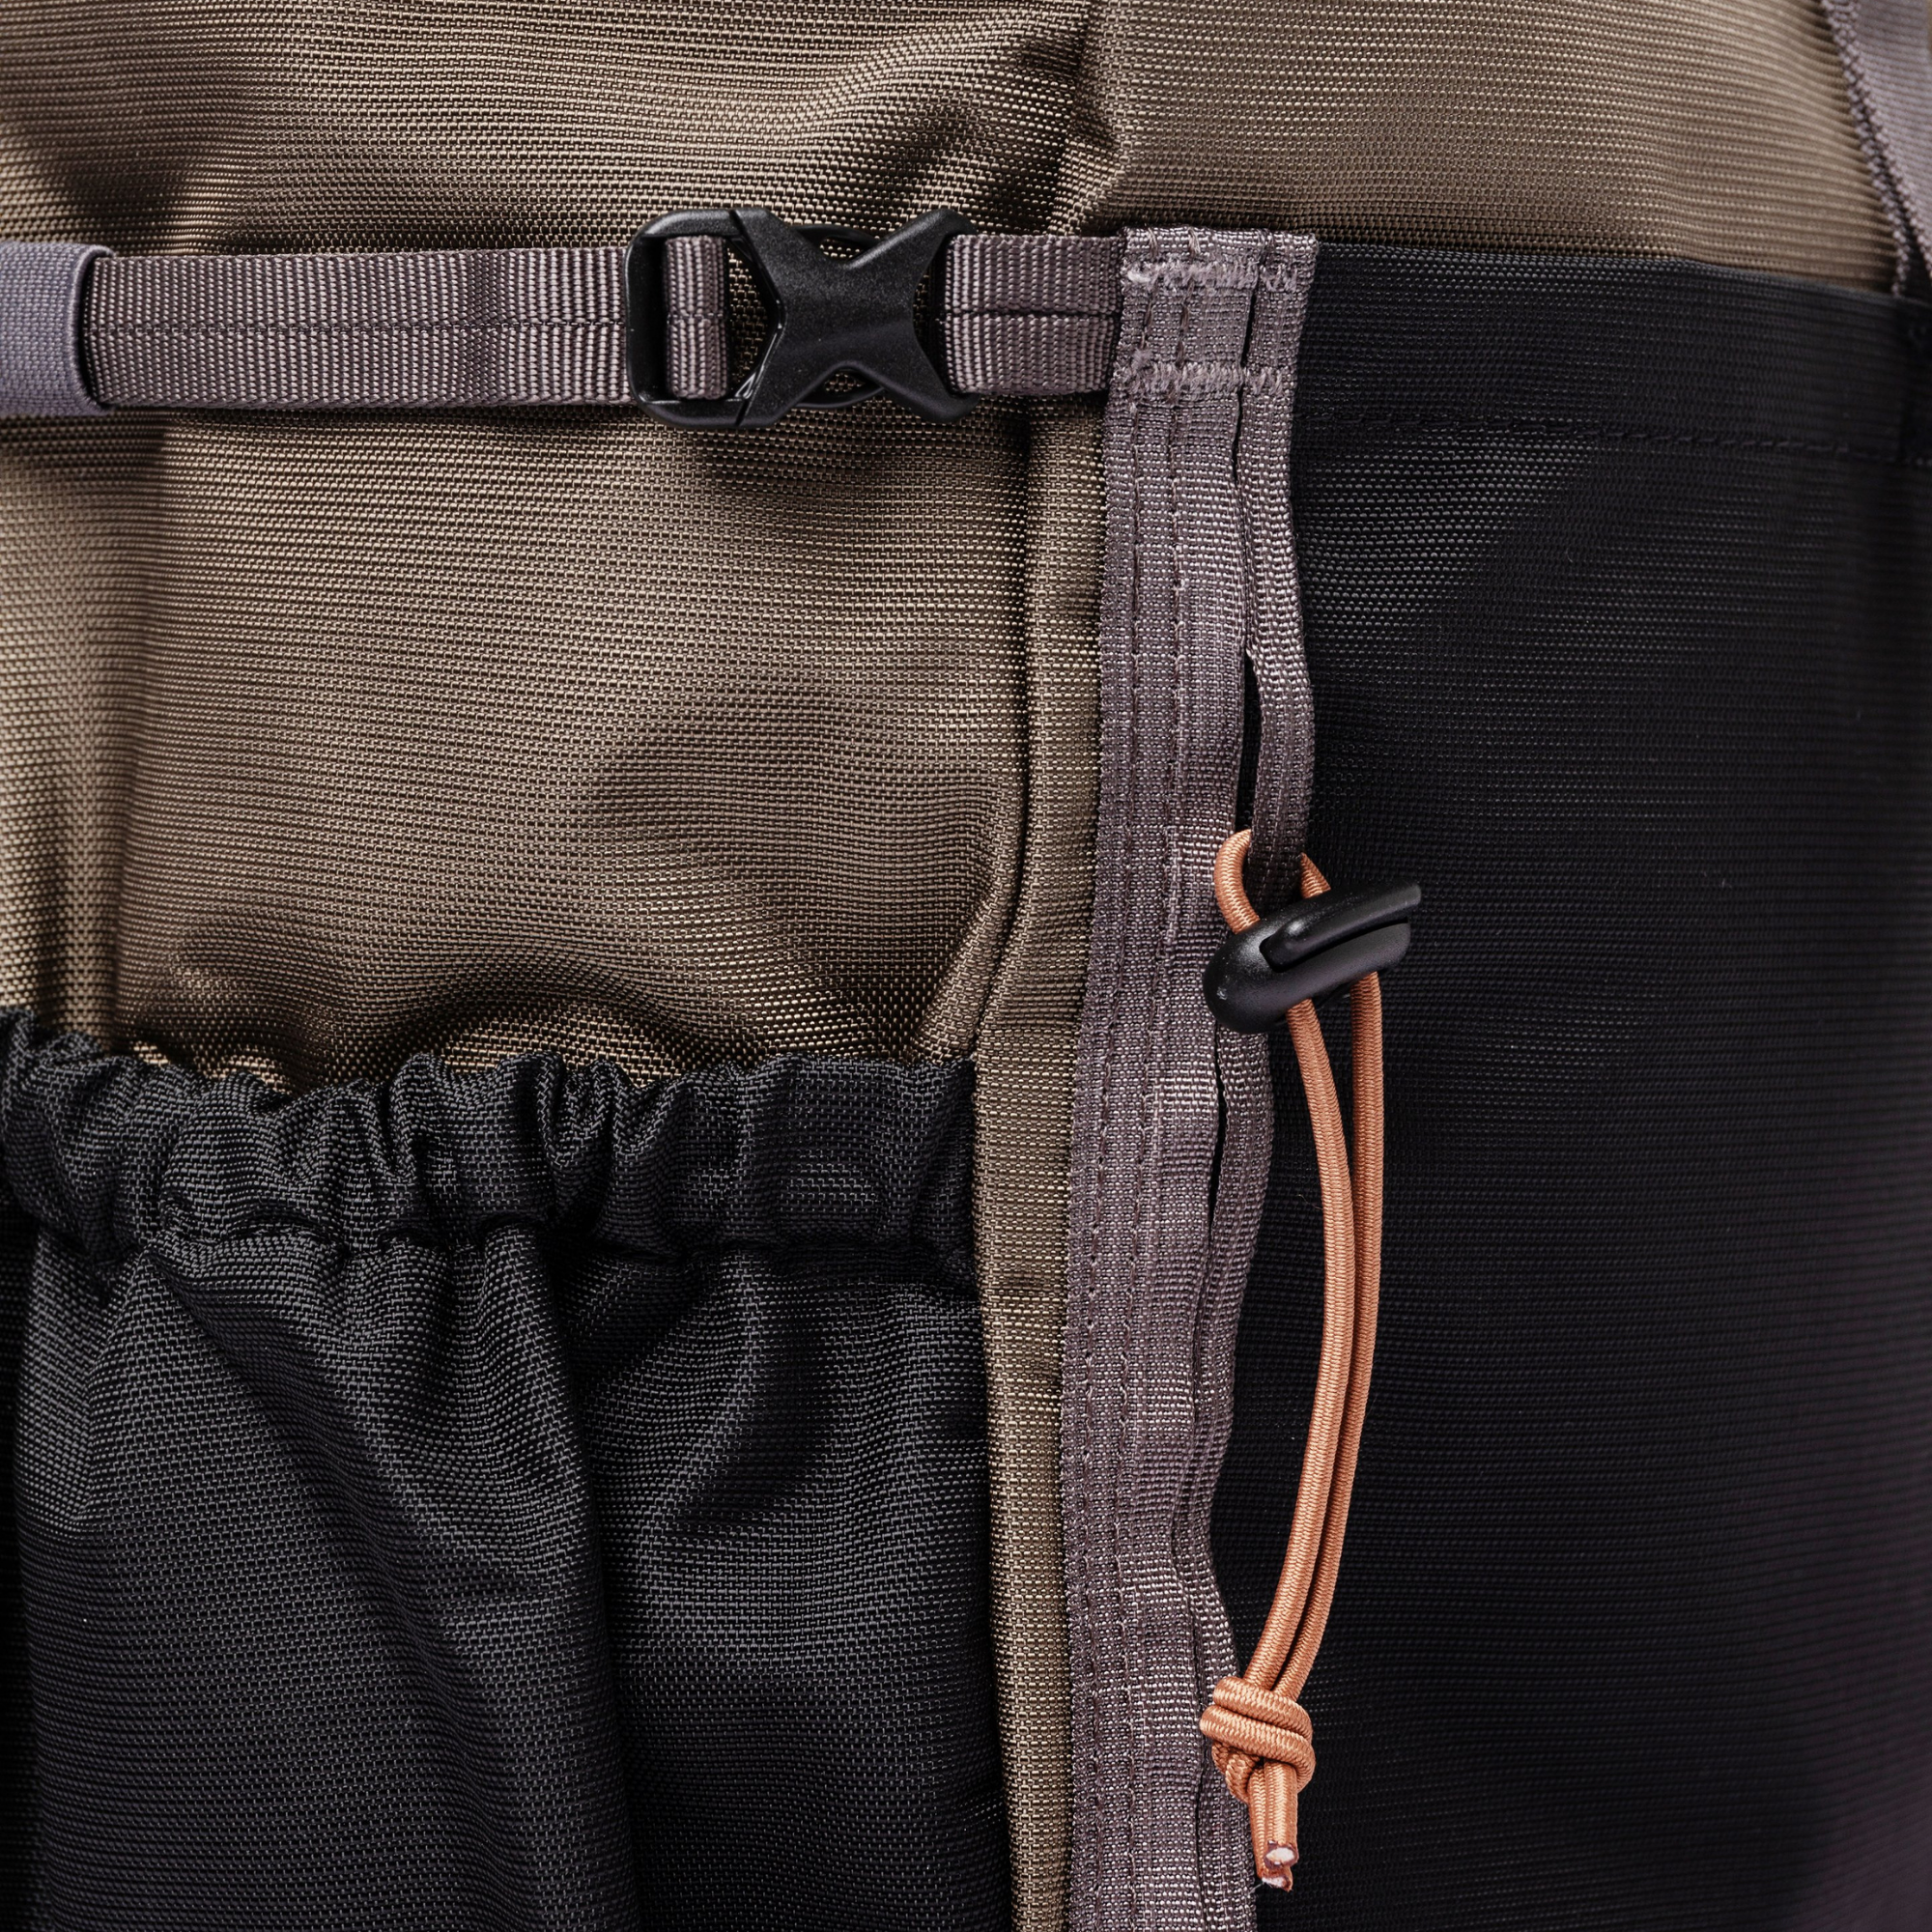 Sandqvist Forest Hike Backpack in Brown SQA2361 | Shop from eightywingold an official brand partner for Sandqvist Canada and US. 